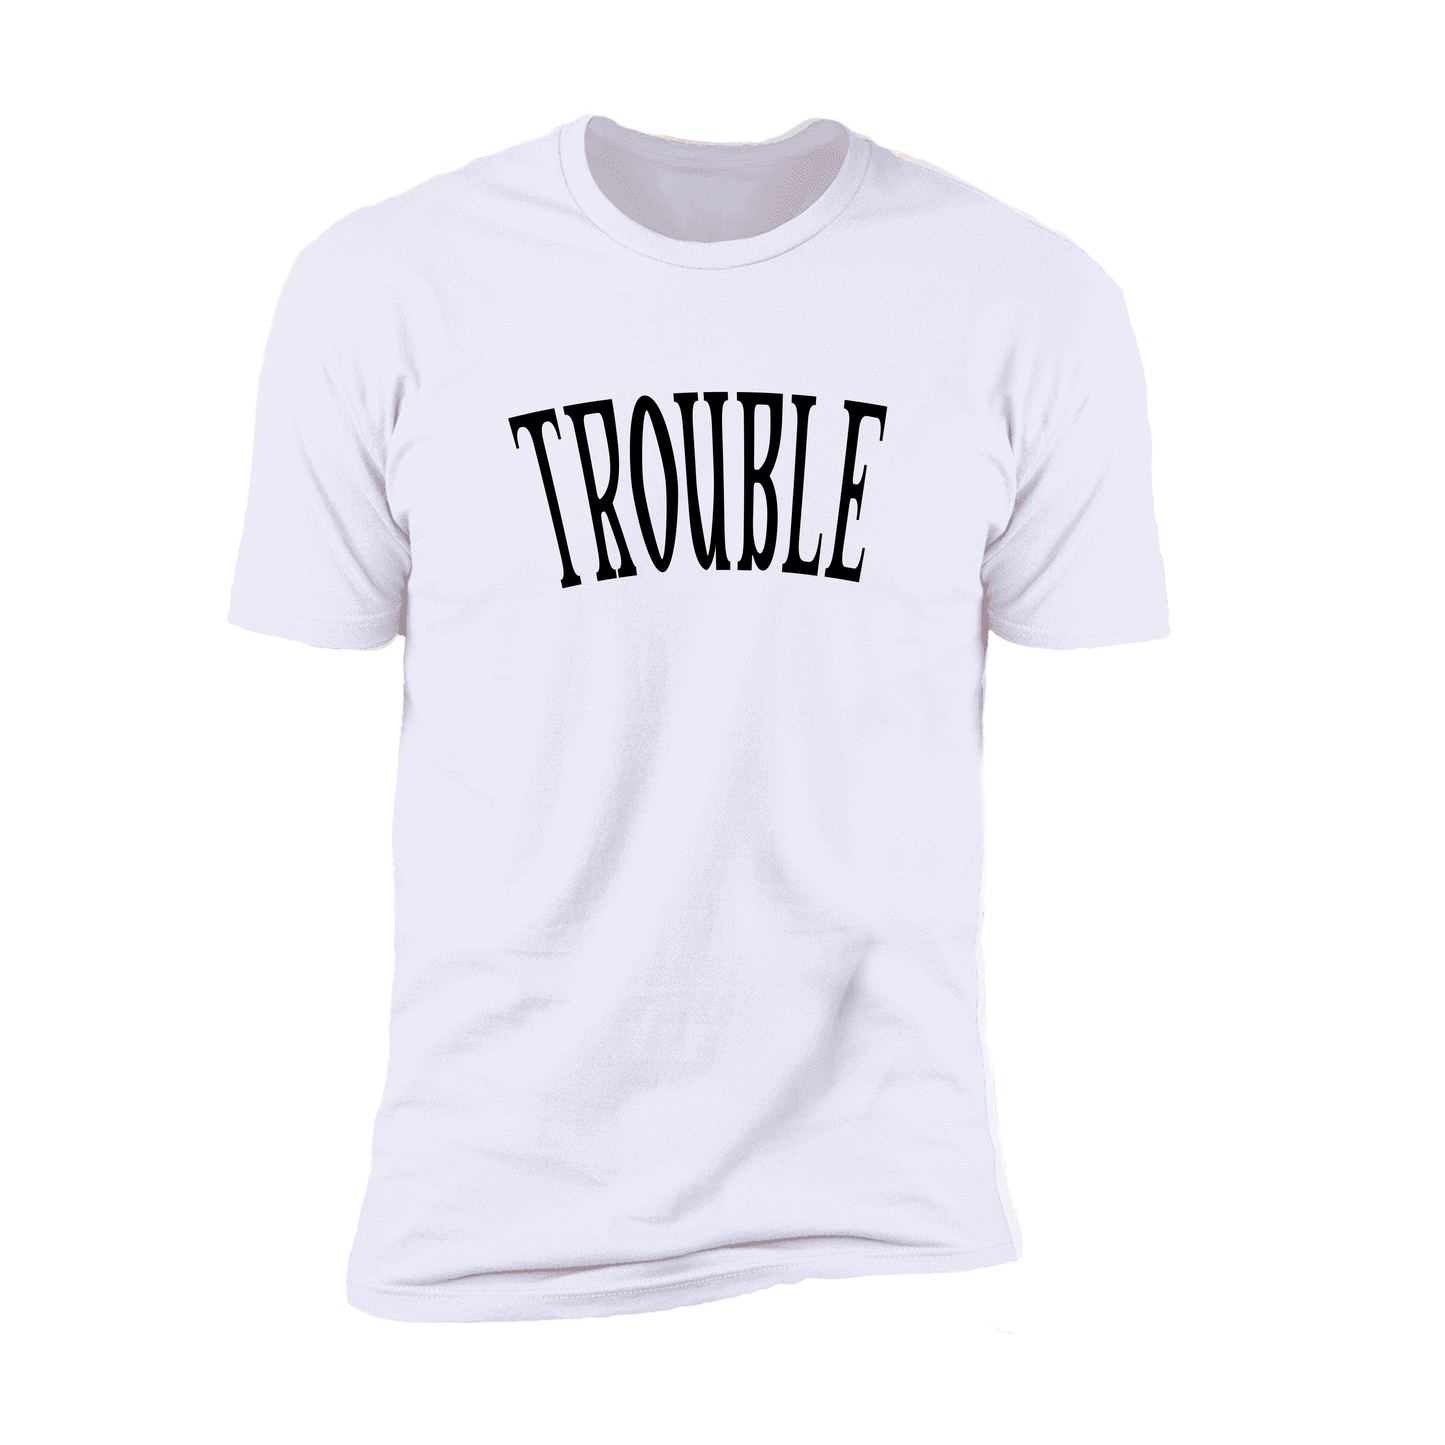 Where I Go Trouble Follows & Trouble Deluxe Tees